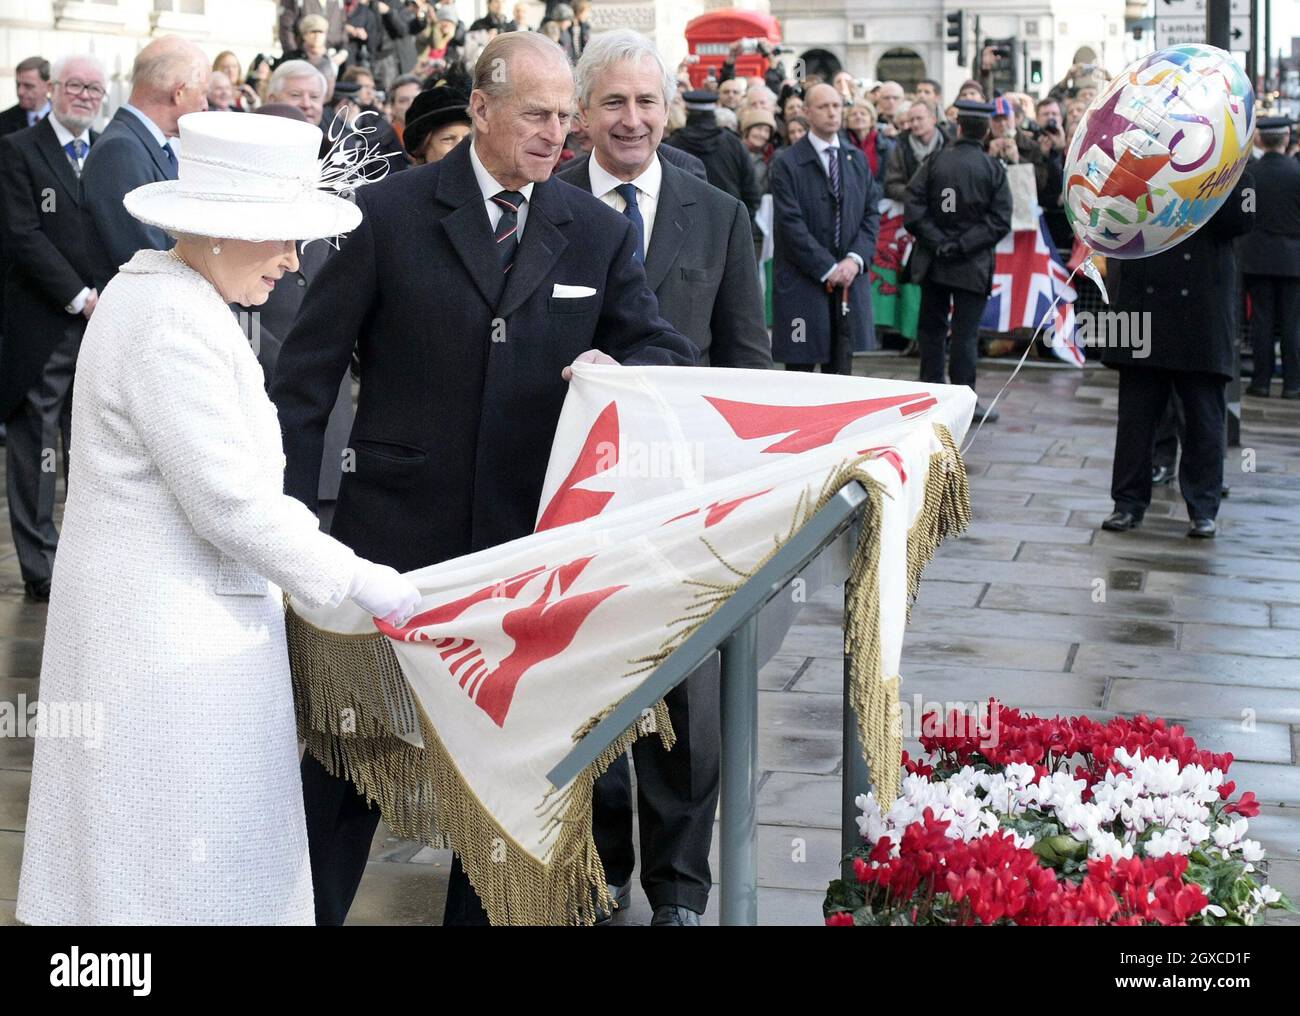 Queen Elizabeth ll and Prince Philip, Duke of Edinburgh unveil the Jubilee Walkway panel on Parliament Square following a service of celebration for their diamond wedding anniversary at Westminster Abbey in London. Stock Photo